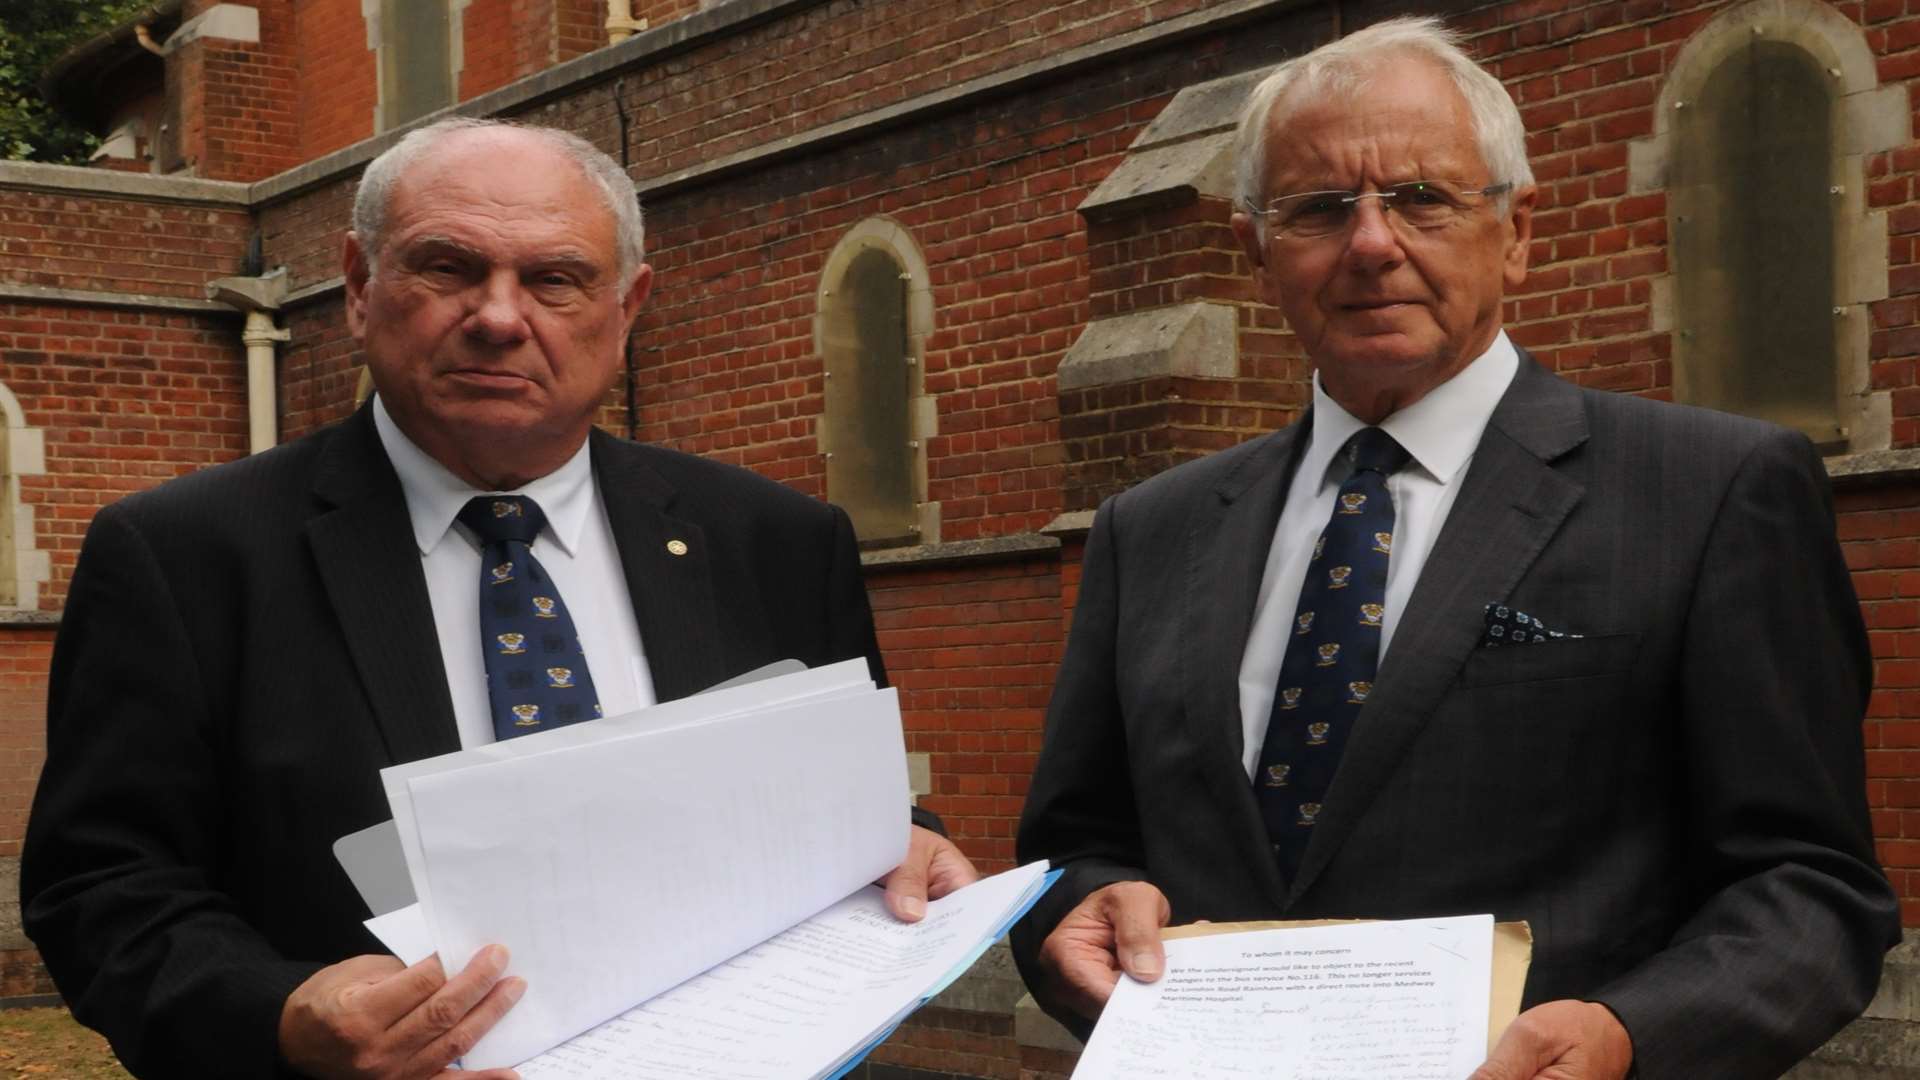 St George's Centre, Chatham Maritime. Cllr David Brake and Cllr Mike O'Brien handed over petitions.